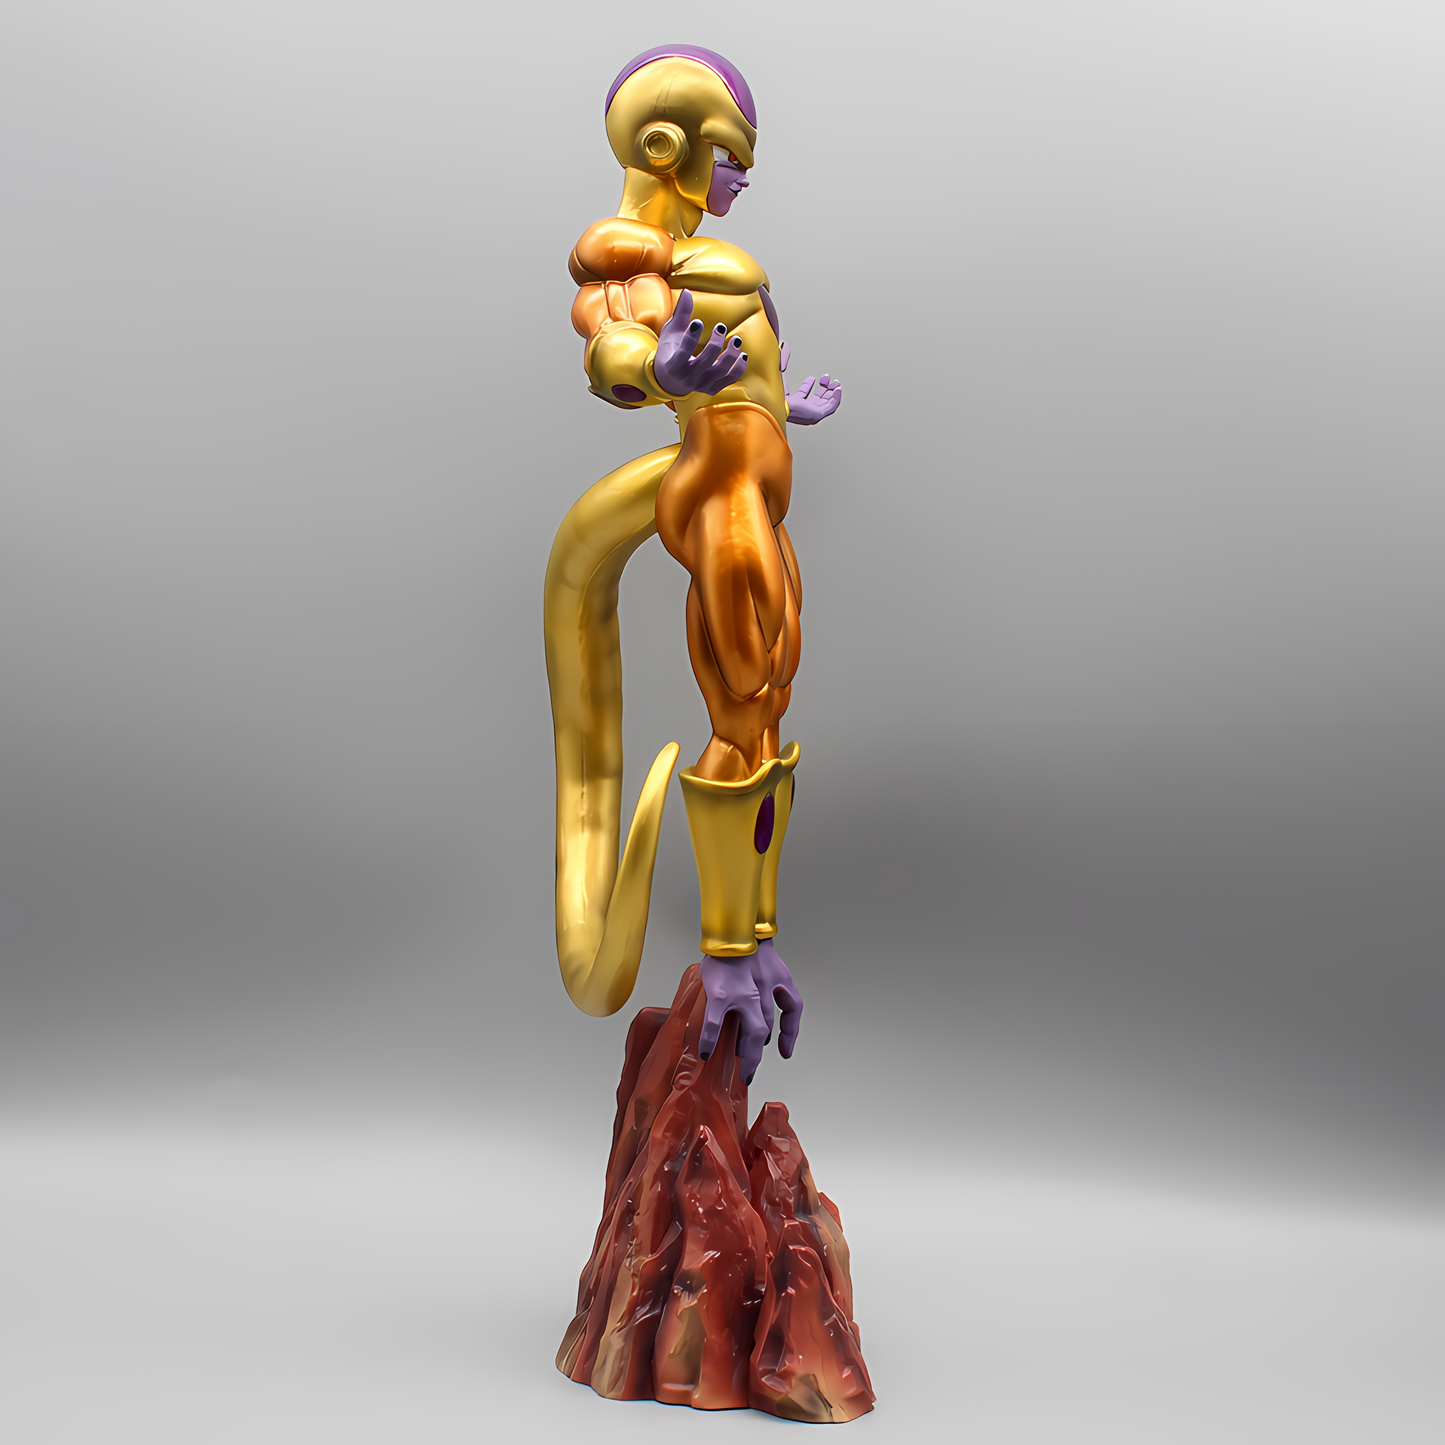 Side view of the imposing Golden Frieza collectible with a dramatic, sweeping tail, dominating the landscape atop a rugged, flame-like pedestal.